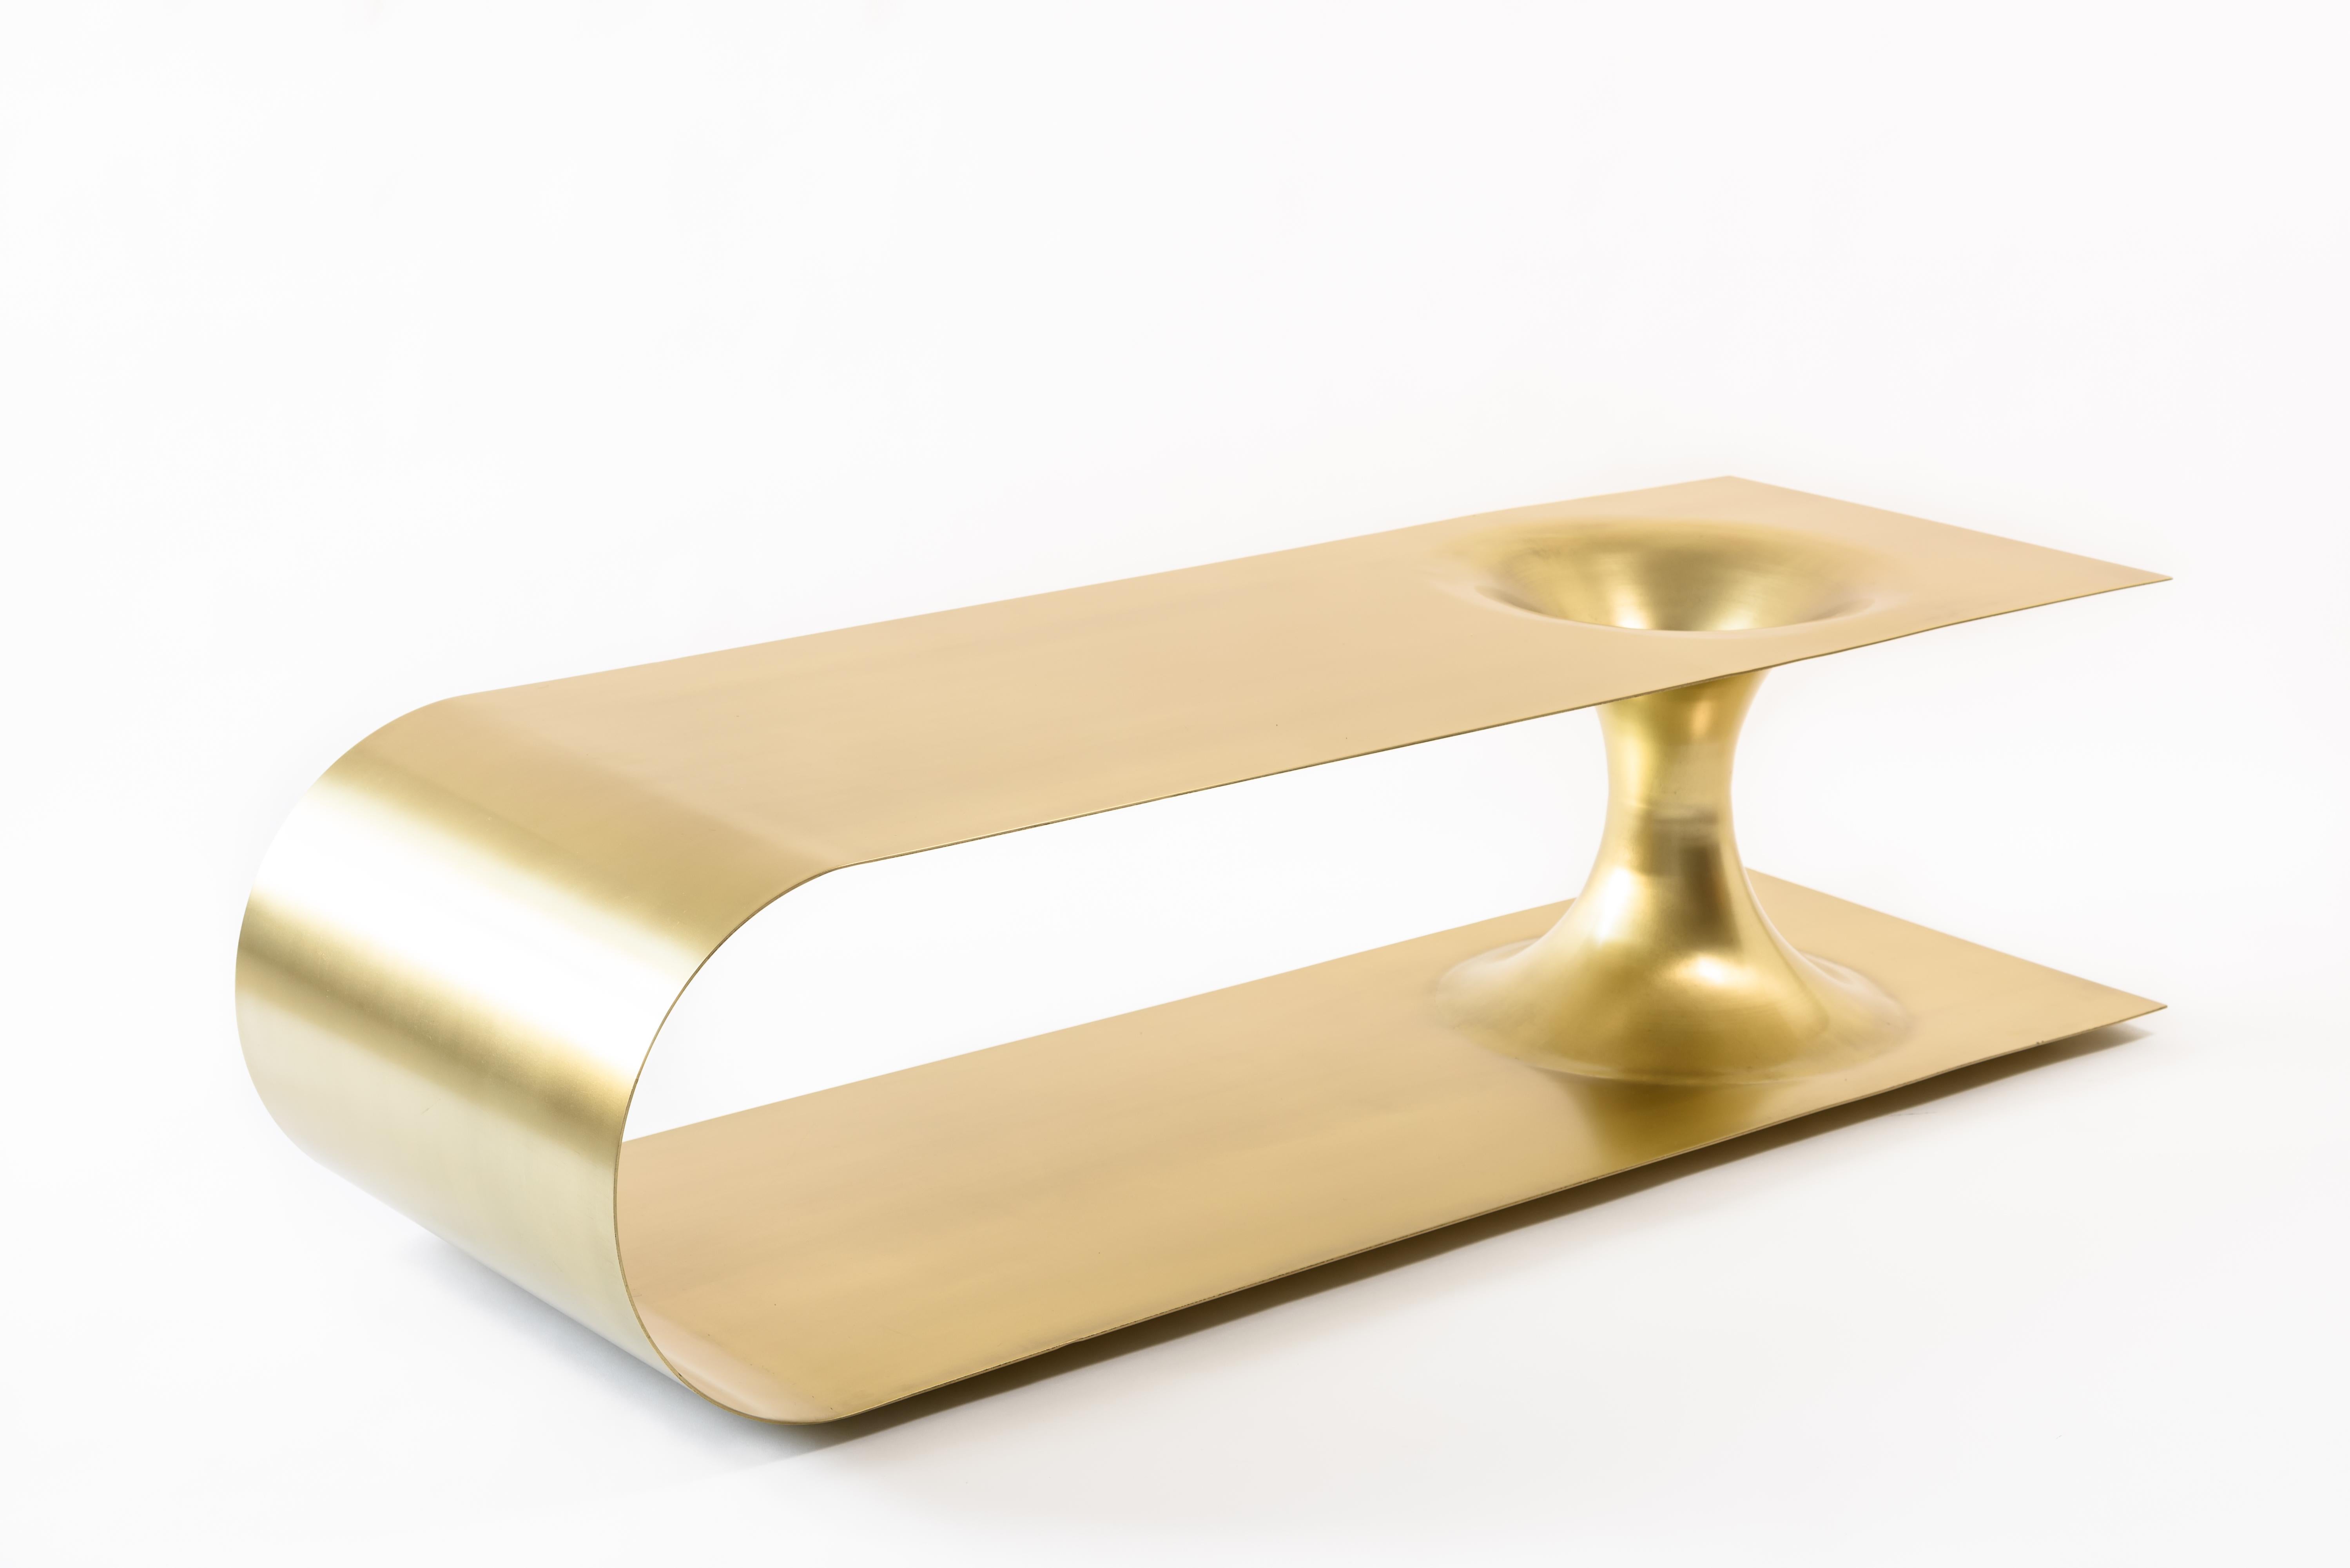 American EÆ Wormhole Occasional Coffee Table in Polished Brass Plated Steel